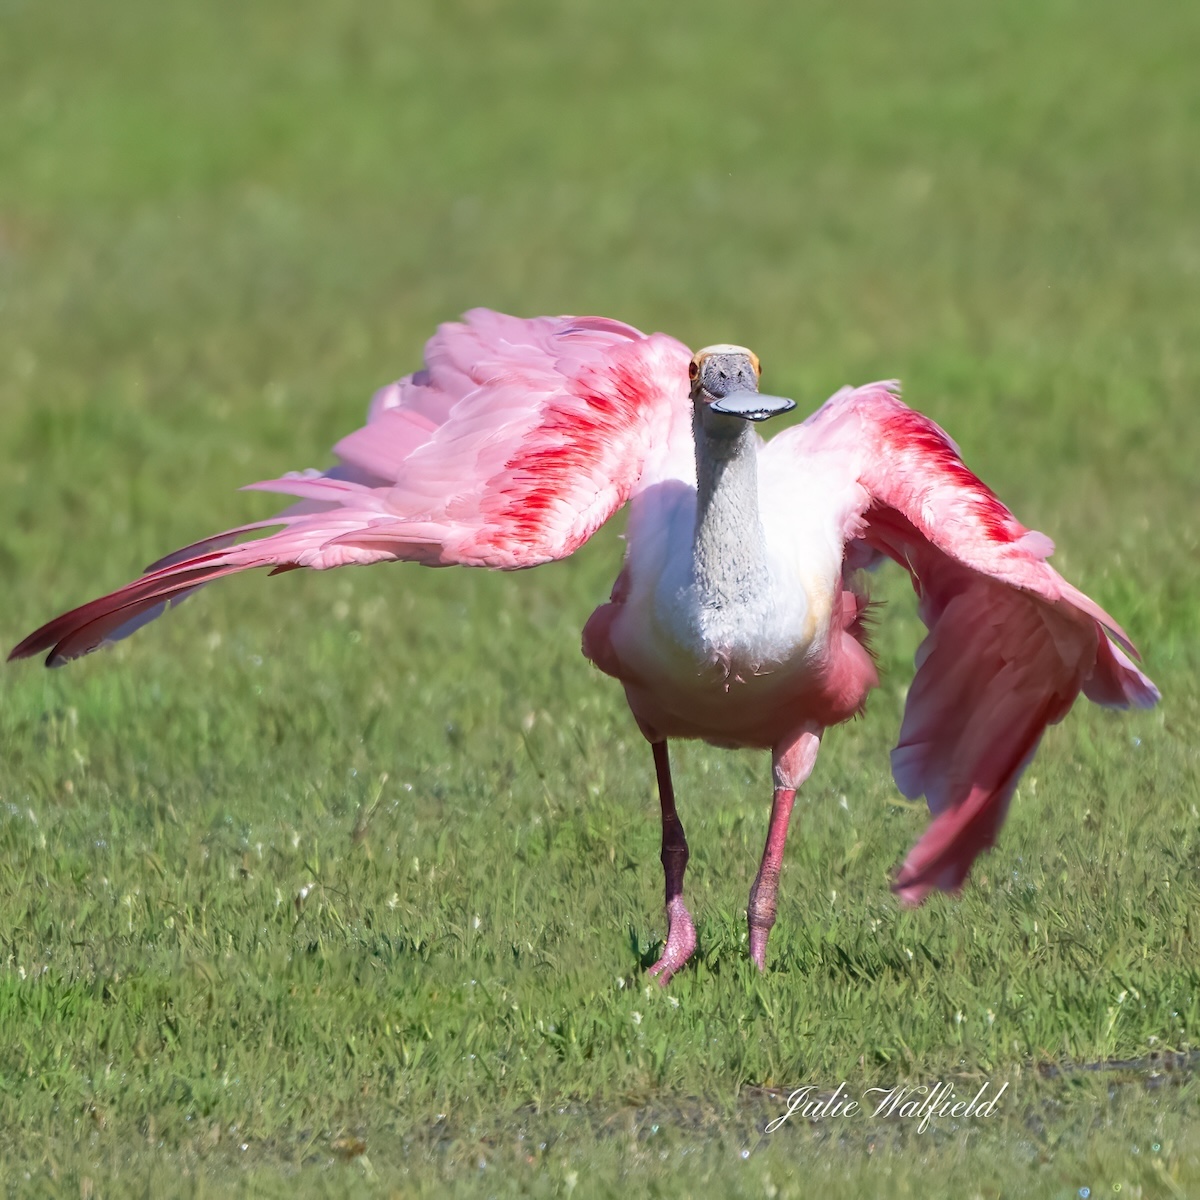 Roseate spoonbill ready for takeoff at Fenney Nature Trail